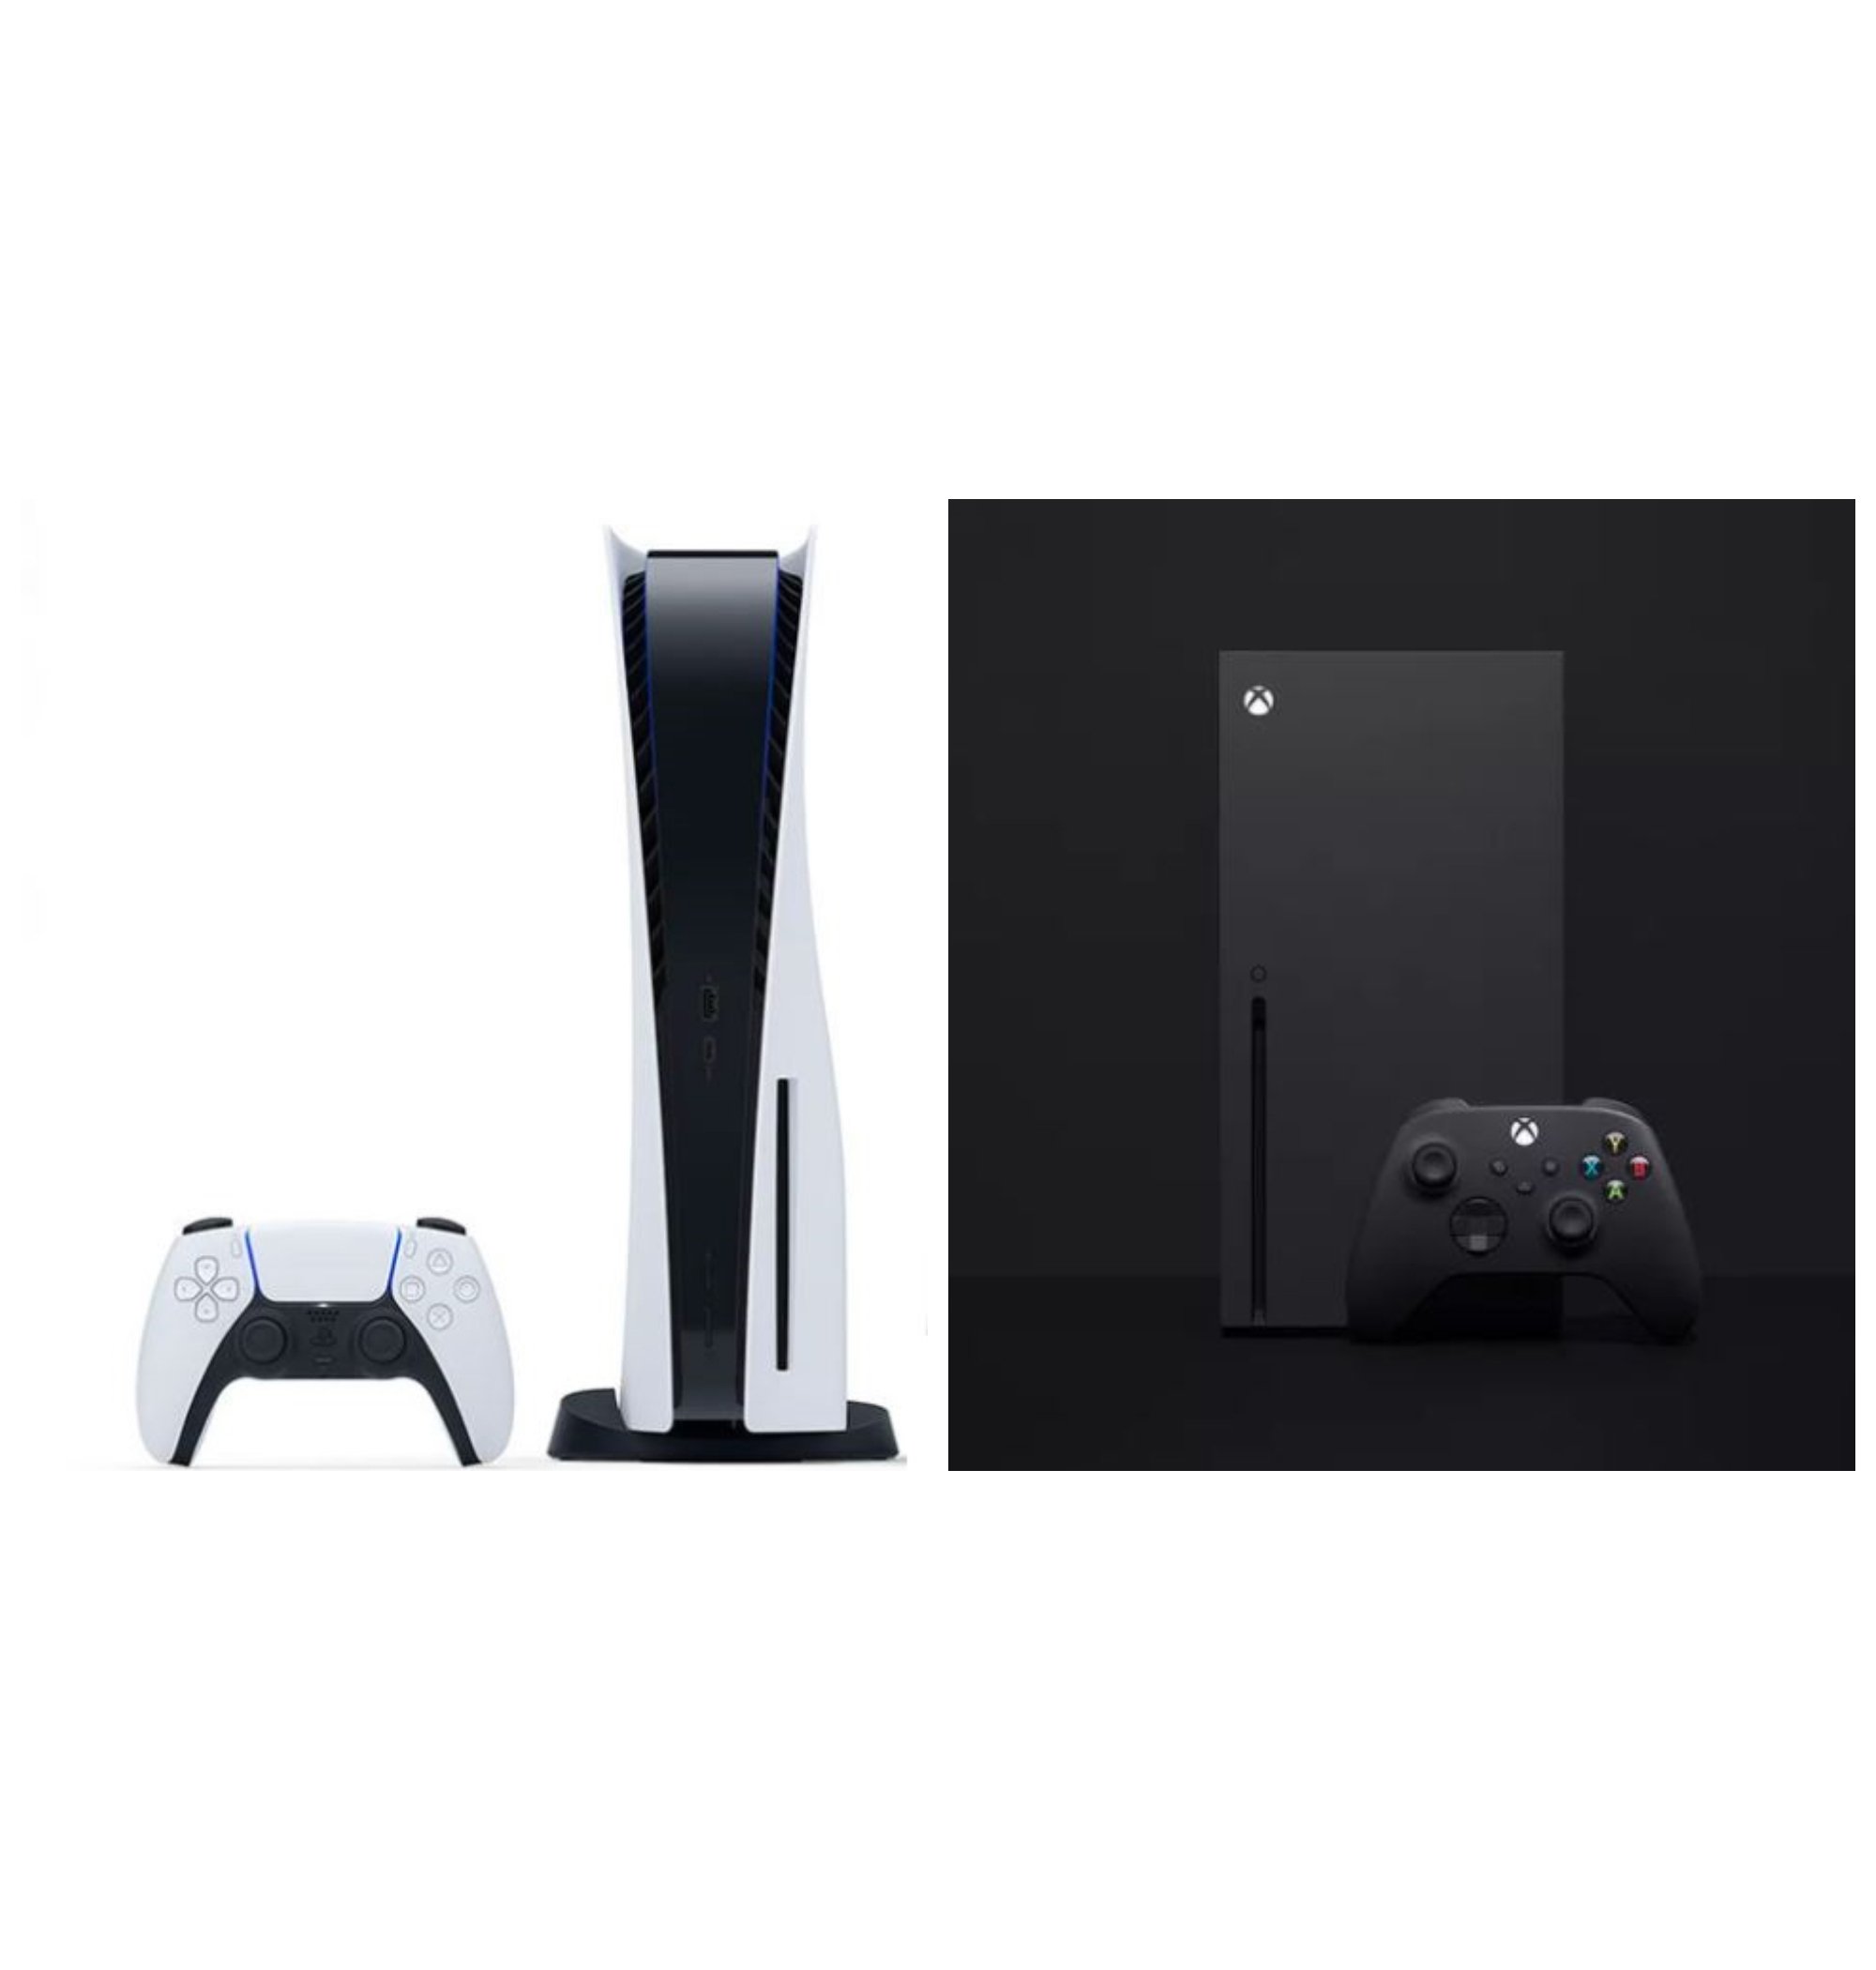 PS5 and Xbox Series X/S Pre